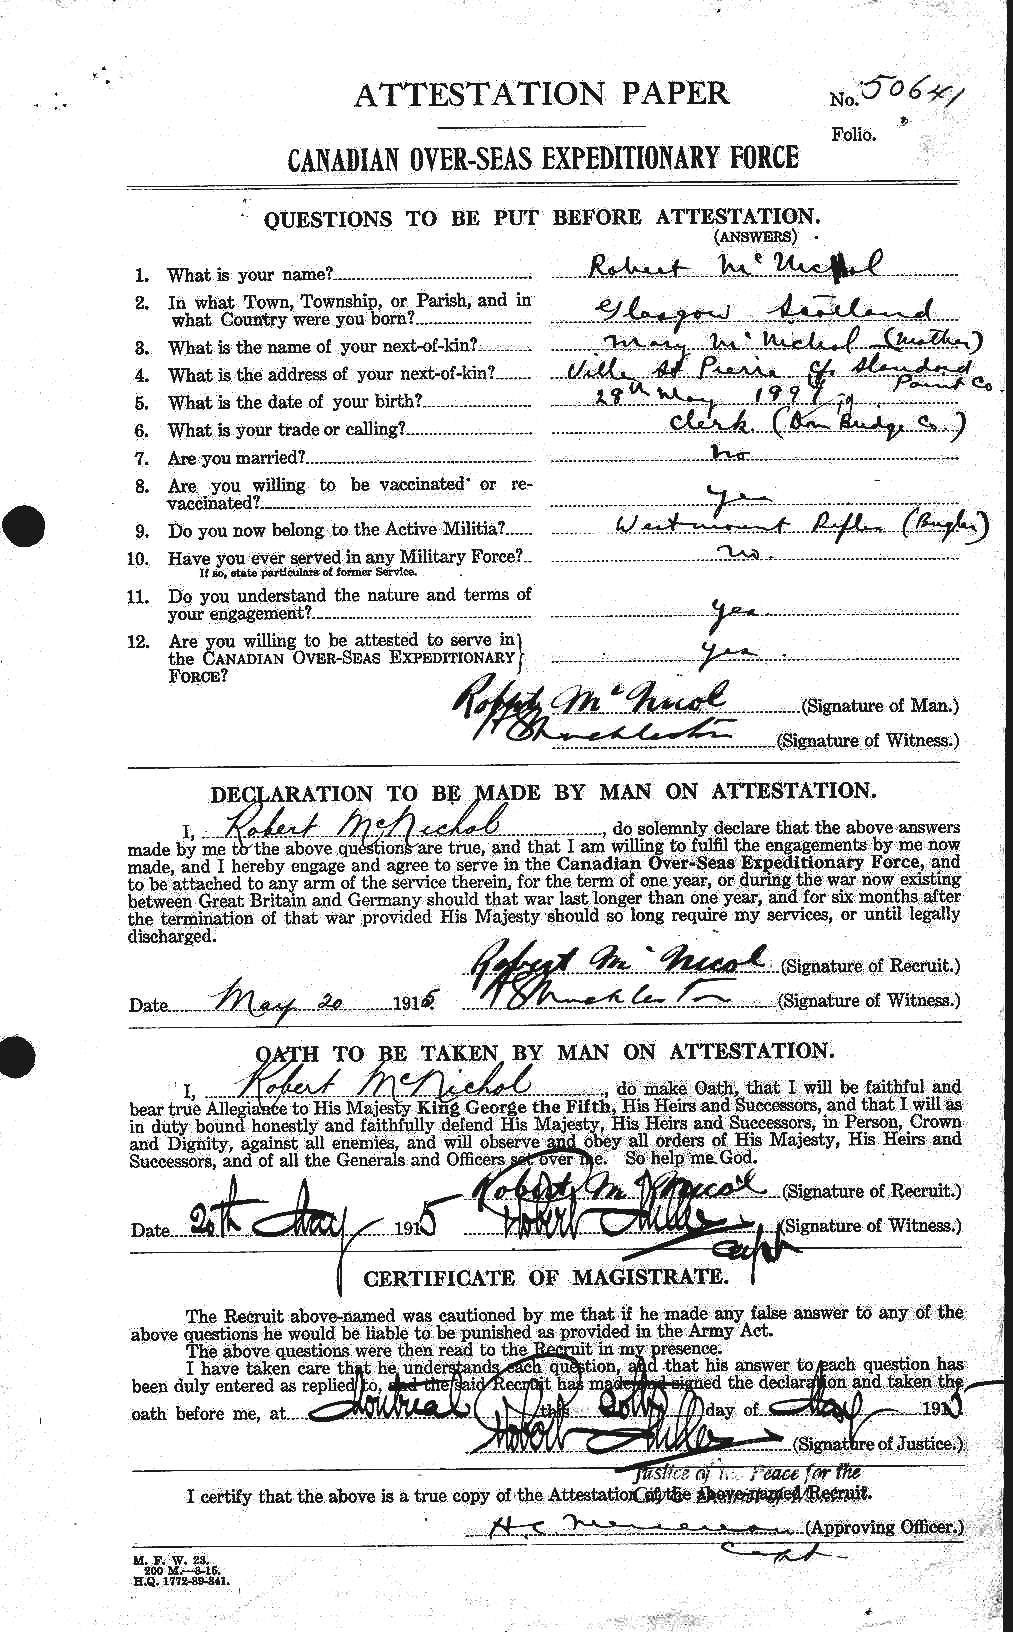 Personnel Records of the First World War - CEF 539221a